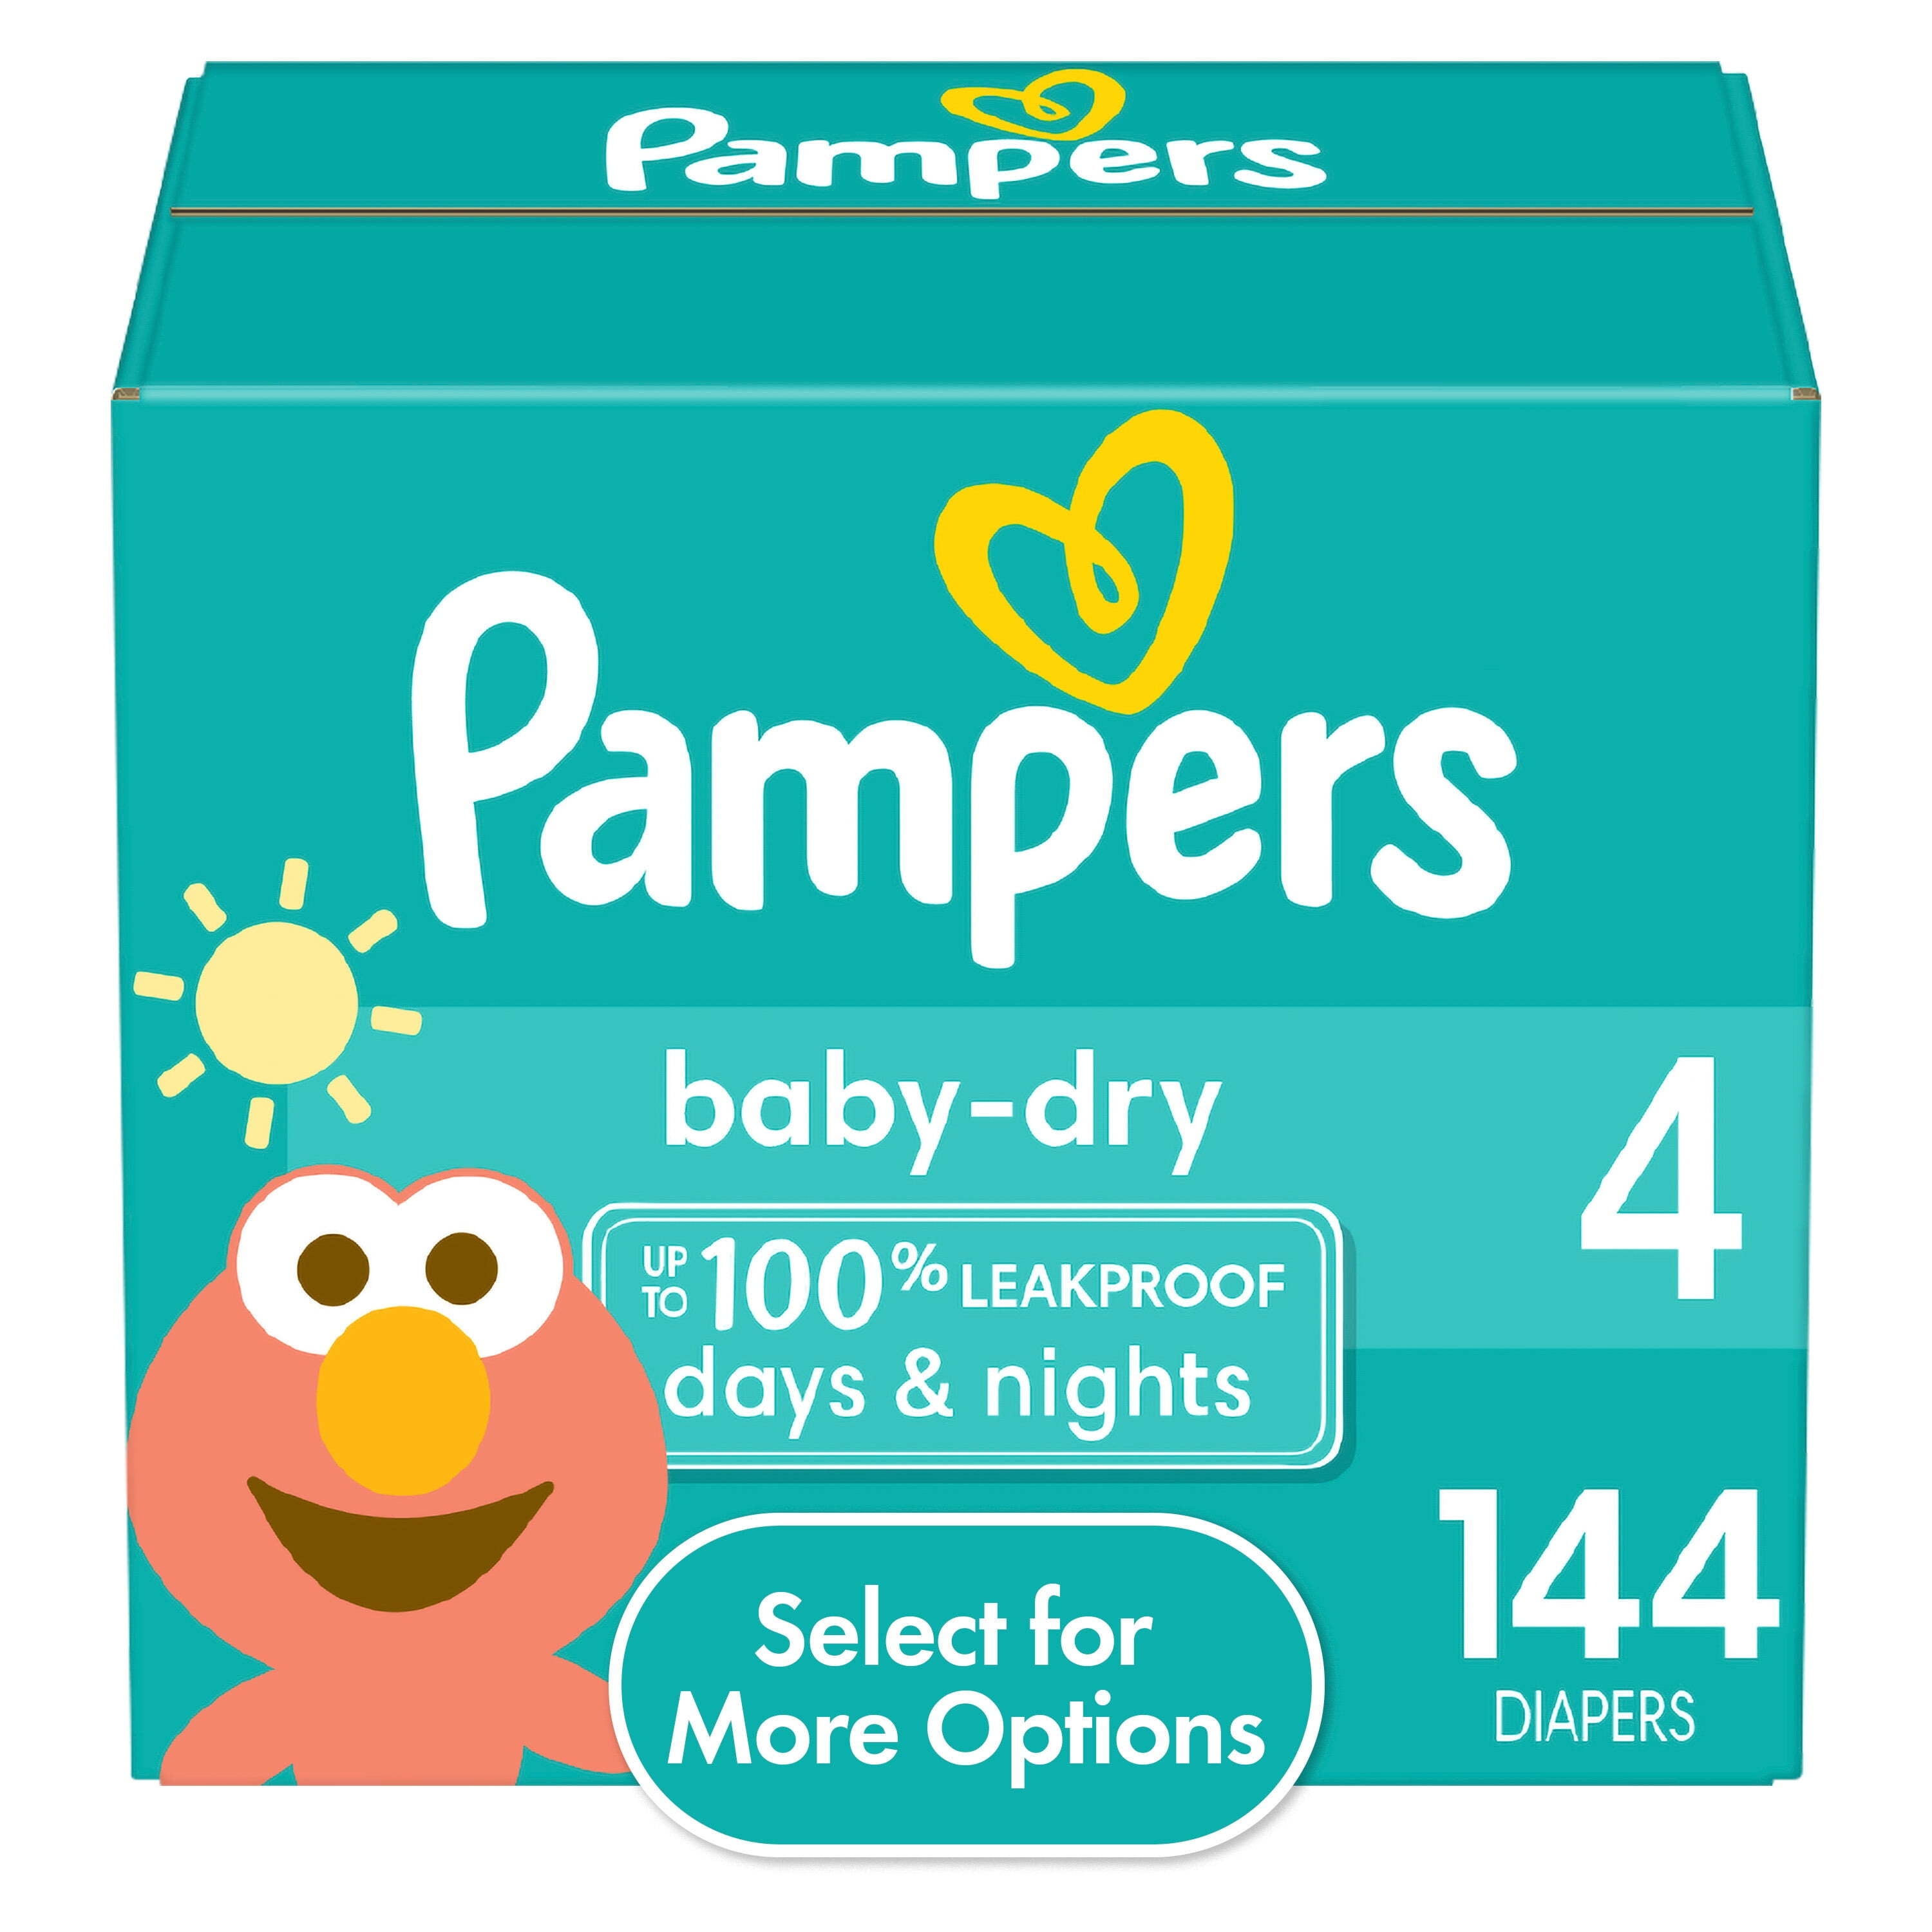 Pampers Baby Dry Diapers Size 4, 144 Count (Select for More Options) 